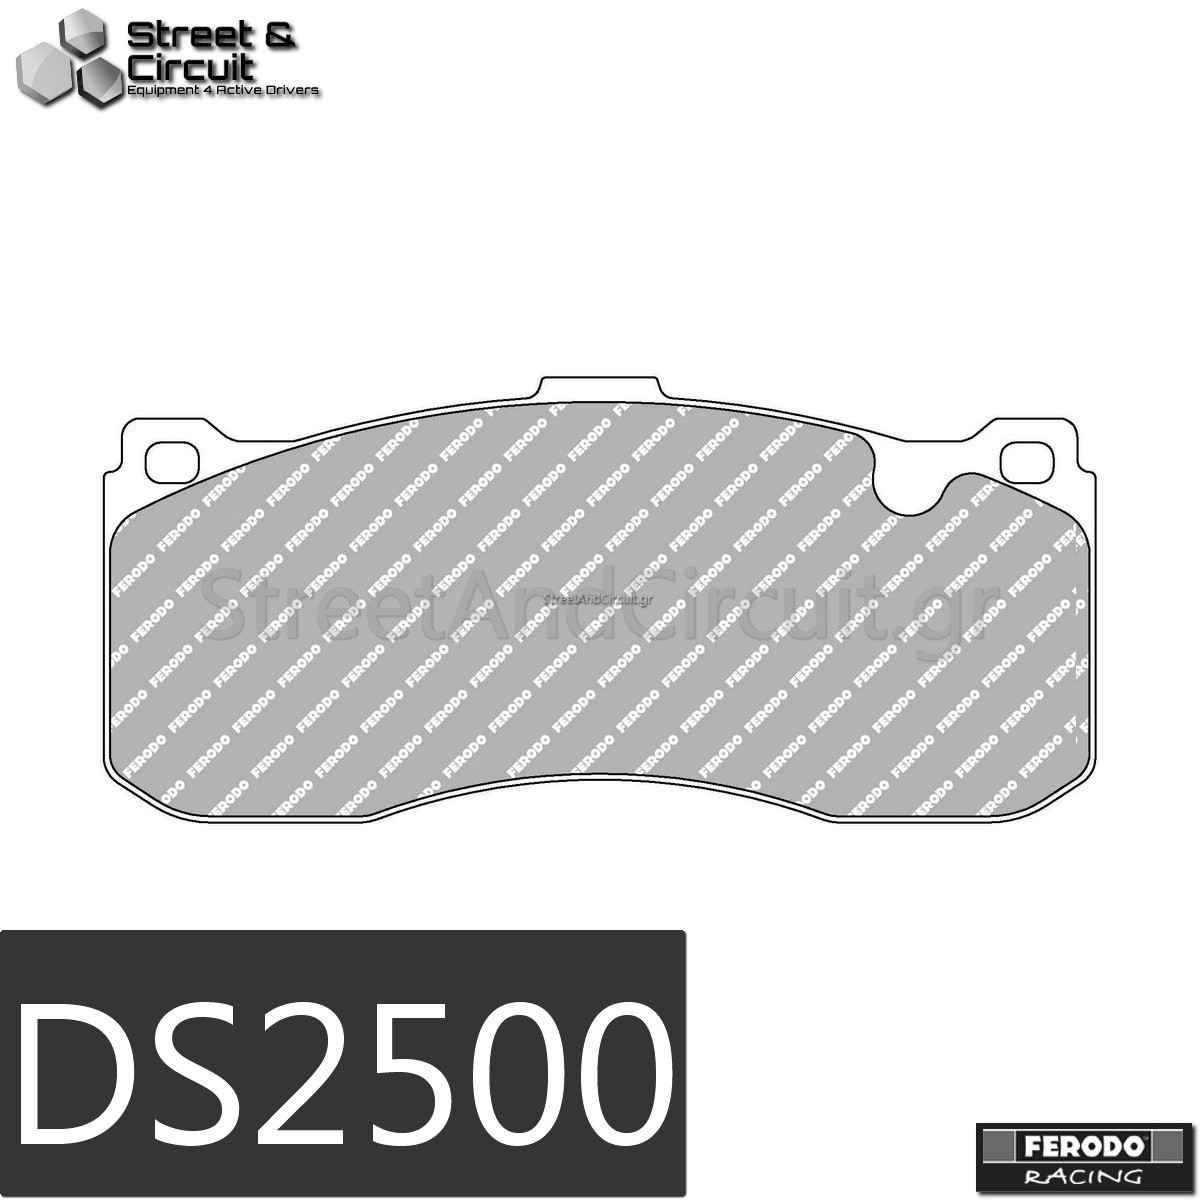 135i Cabriolet 1 (E88) 2004-2011 (FRONT), Brake System: BREMBO - Ferodo Racing Τακάκια *DS2500*